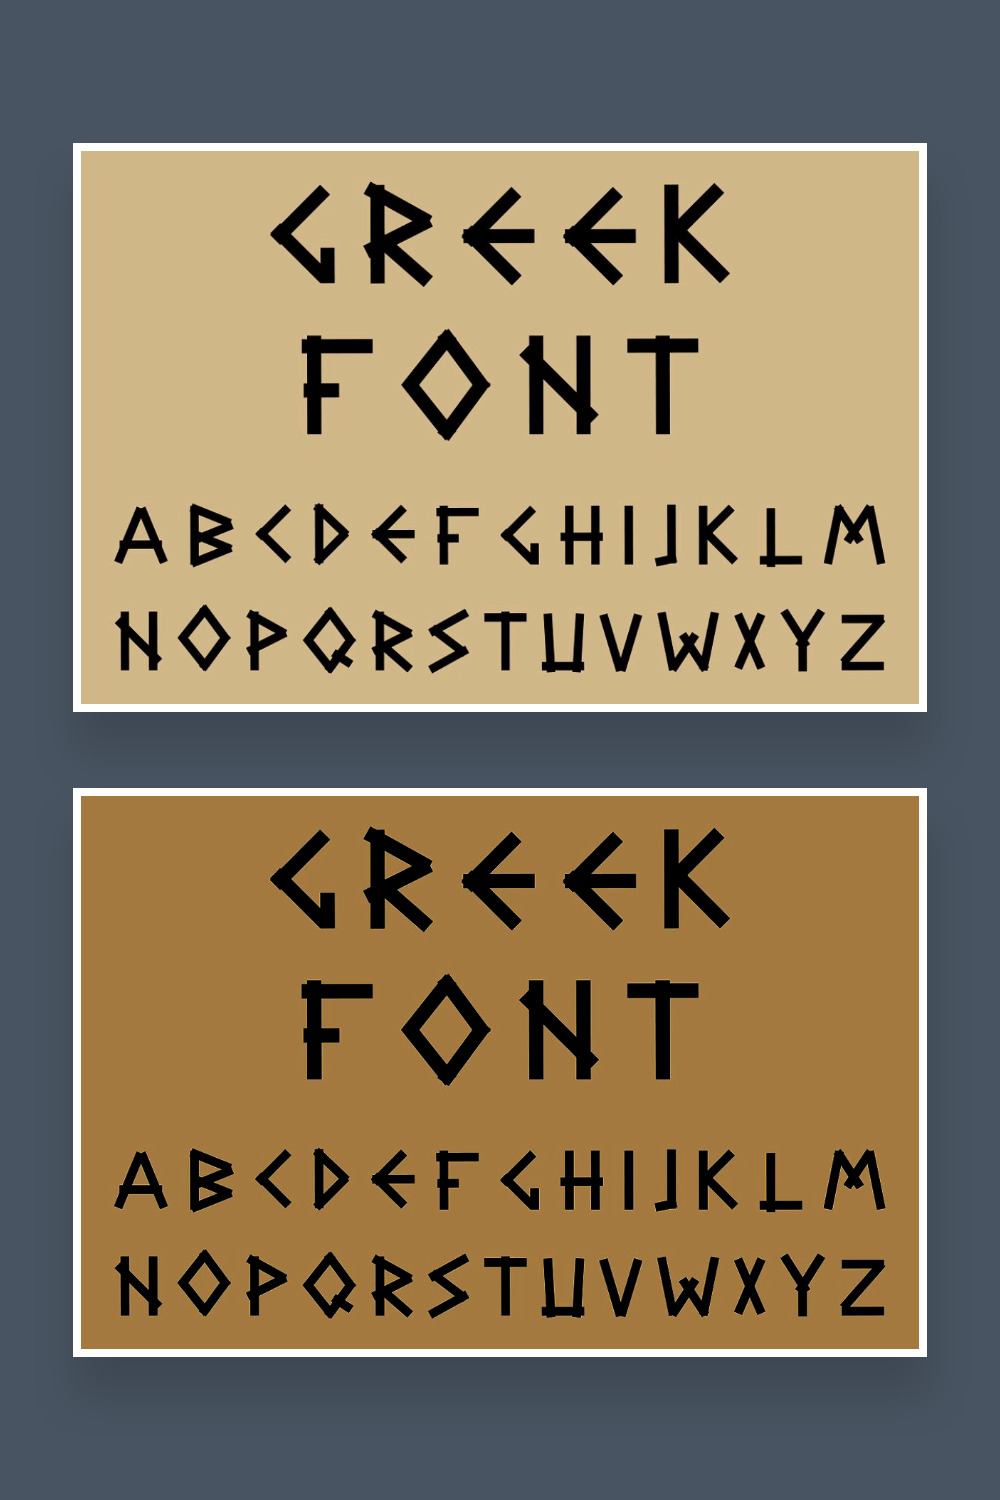 Black letters in ancient style pinterest.